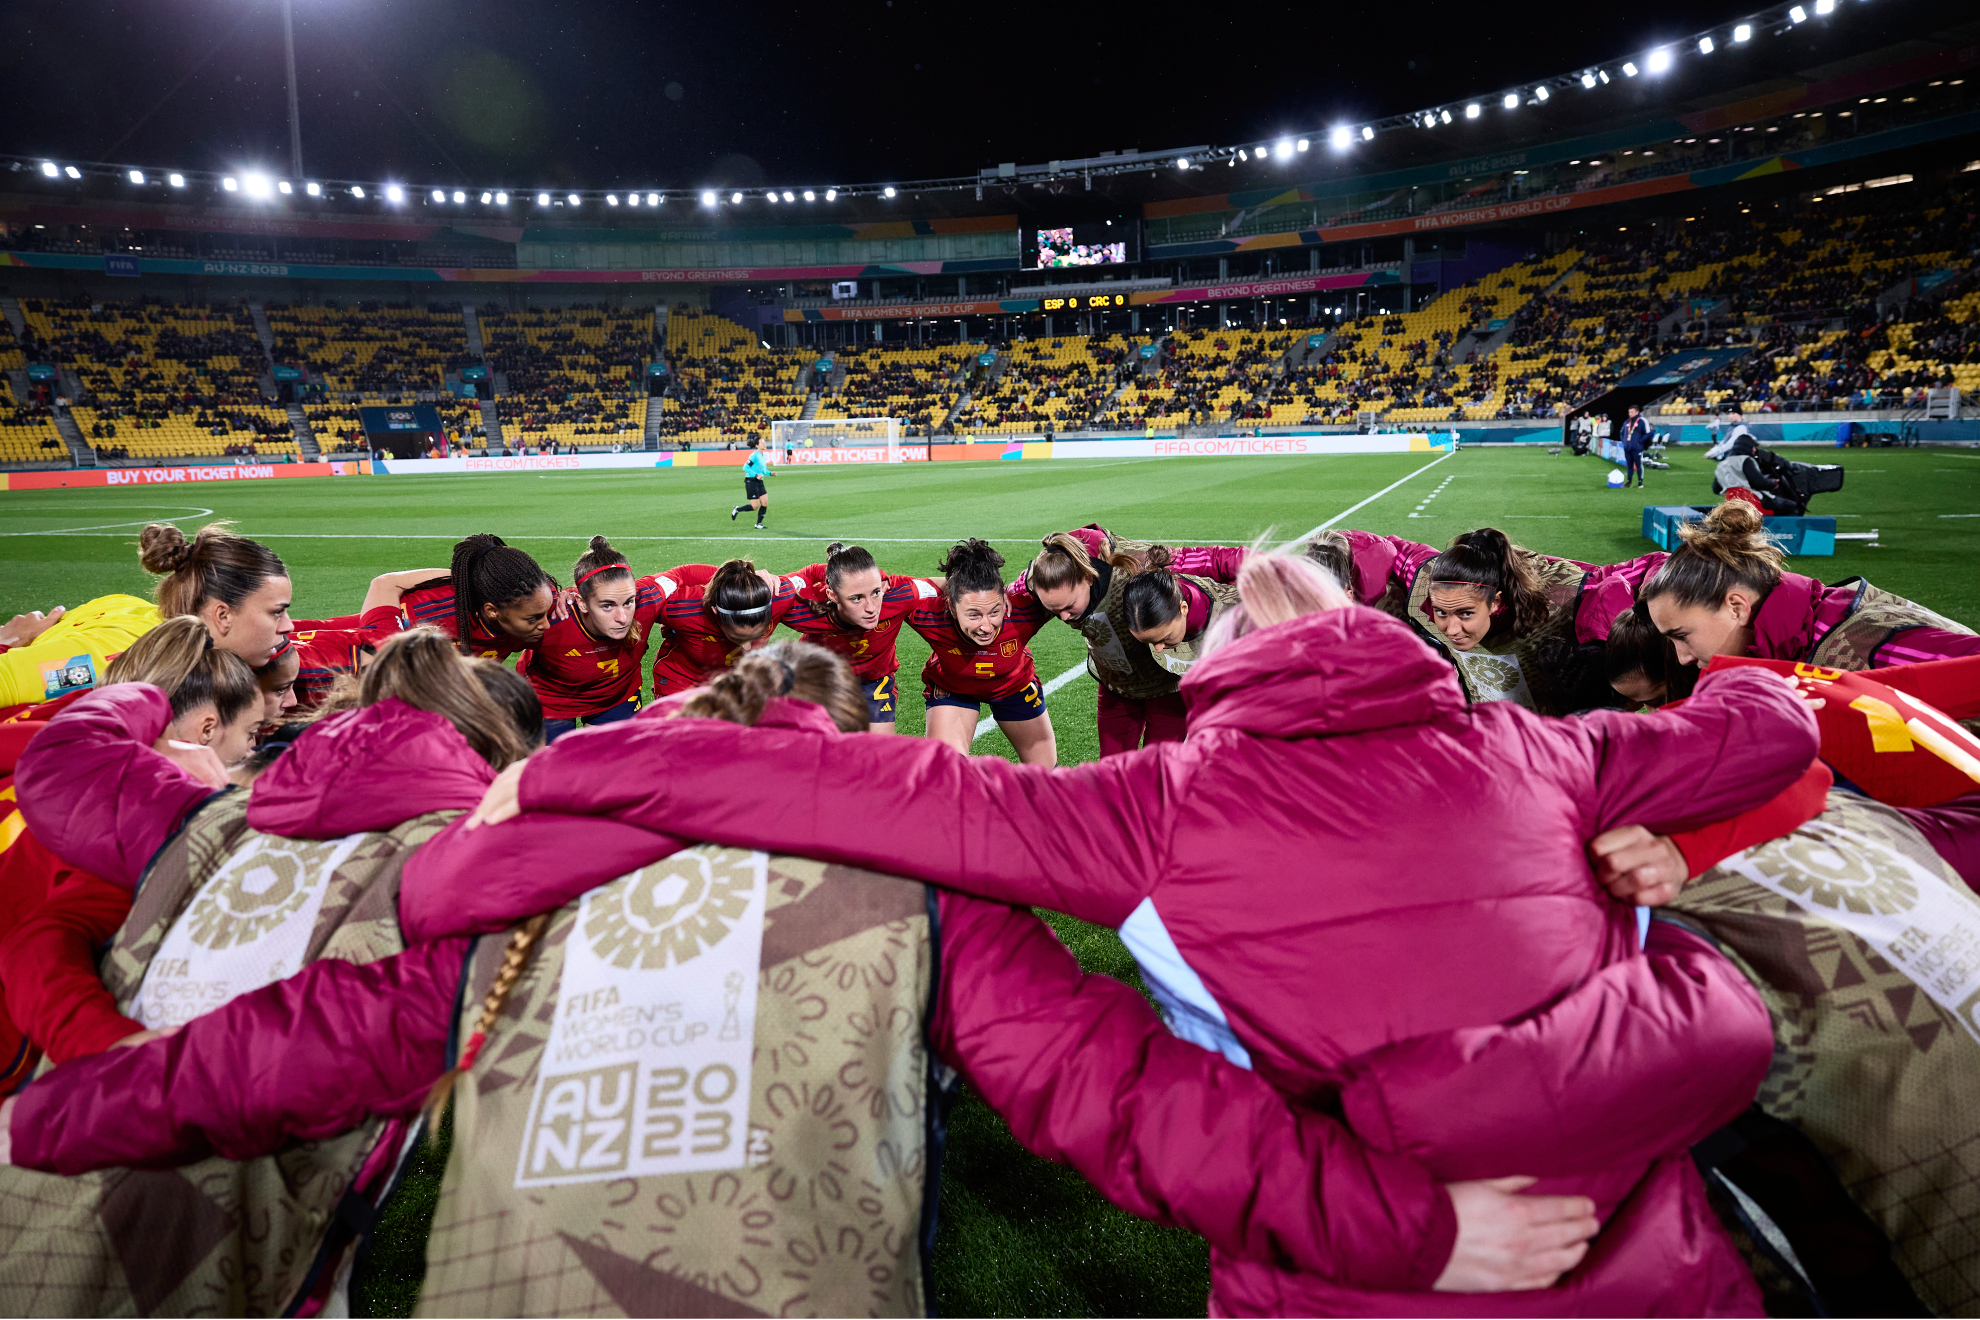 Spain's World Cup winning-women call for drastic changes in the RFEF